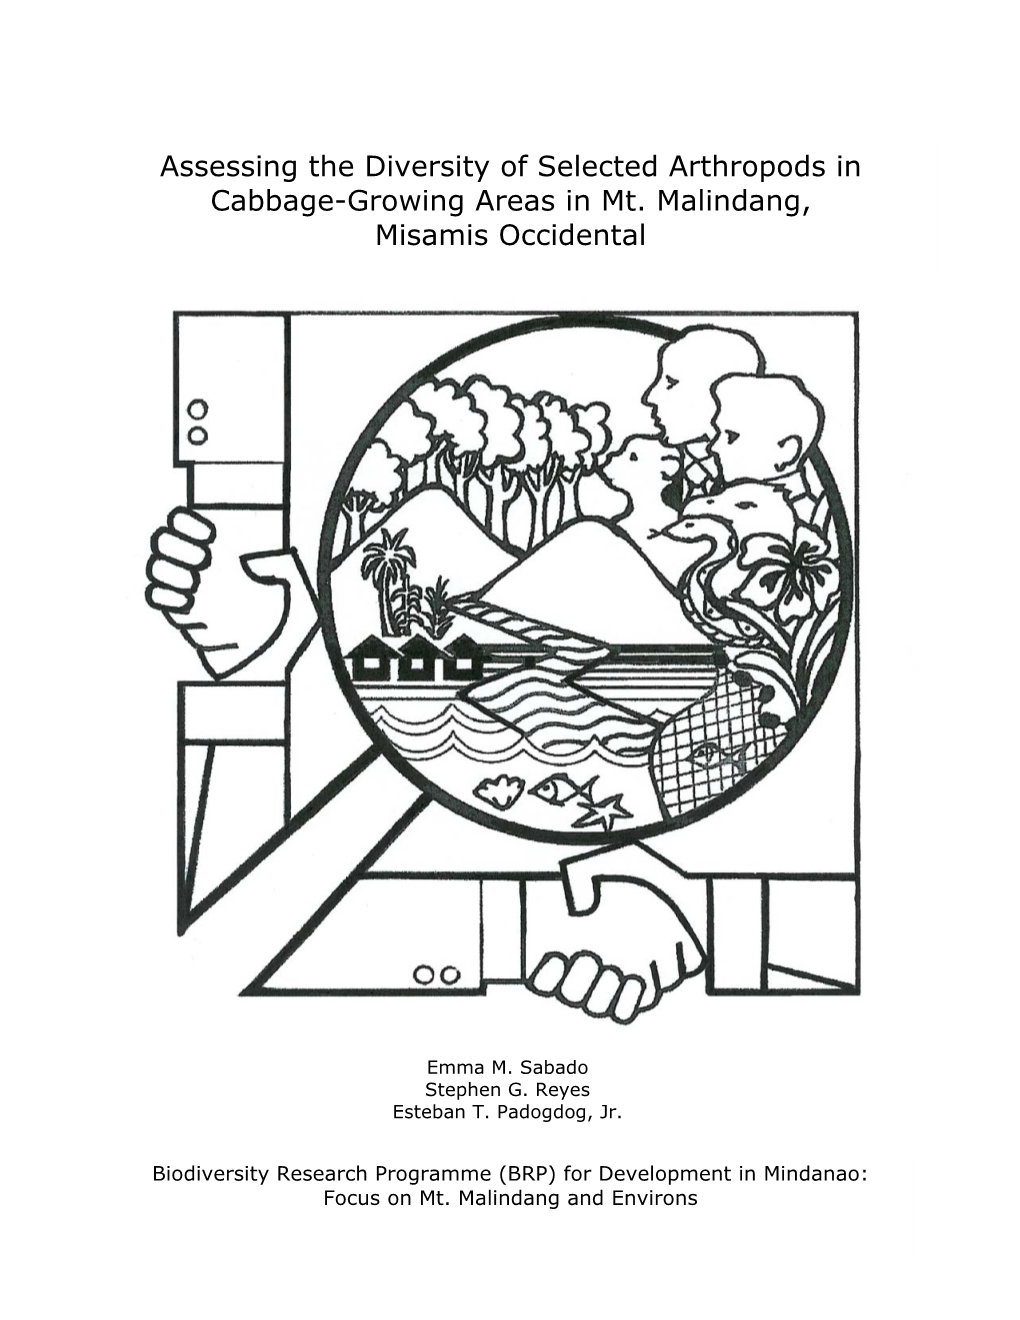 Assessing the Diversity of Selected Arthropods in Cabbage-Growing Areas in Mt. Malindang, Misamis Occidental